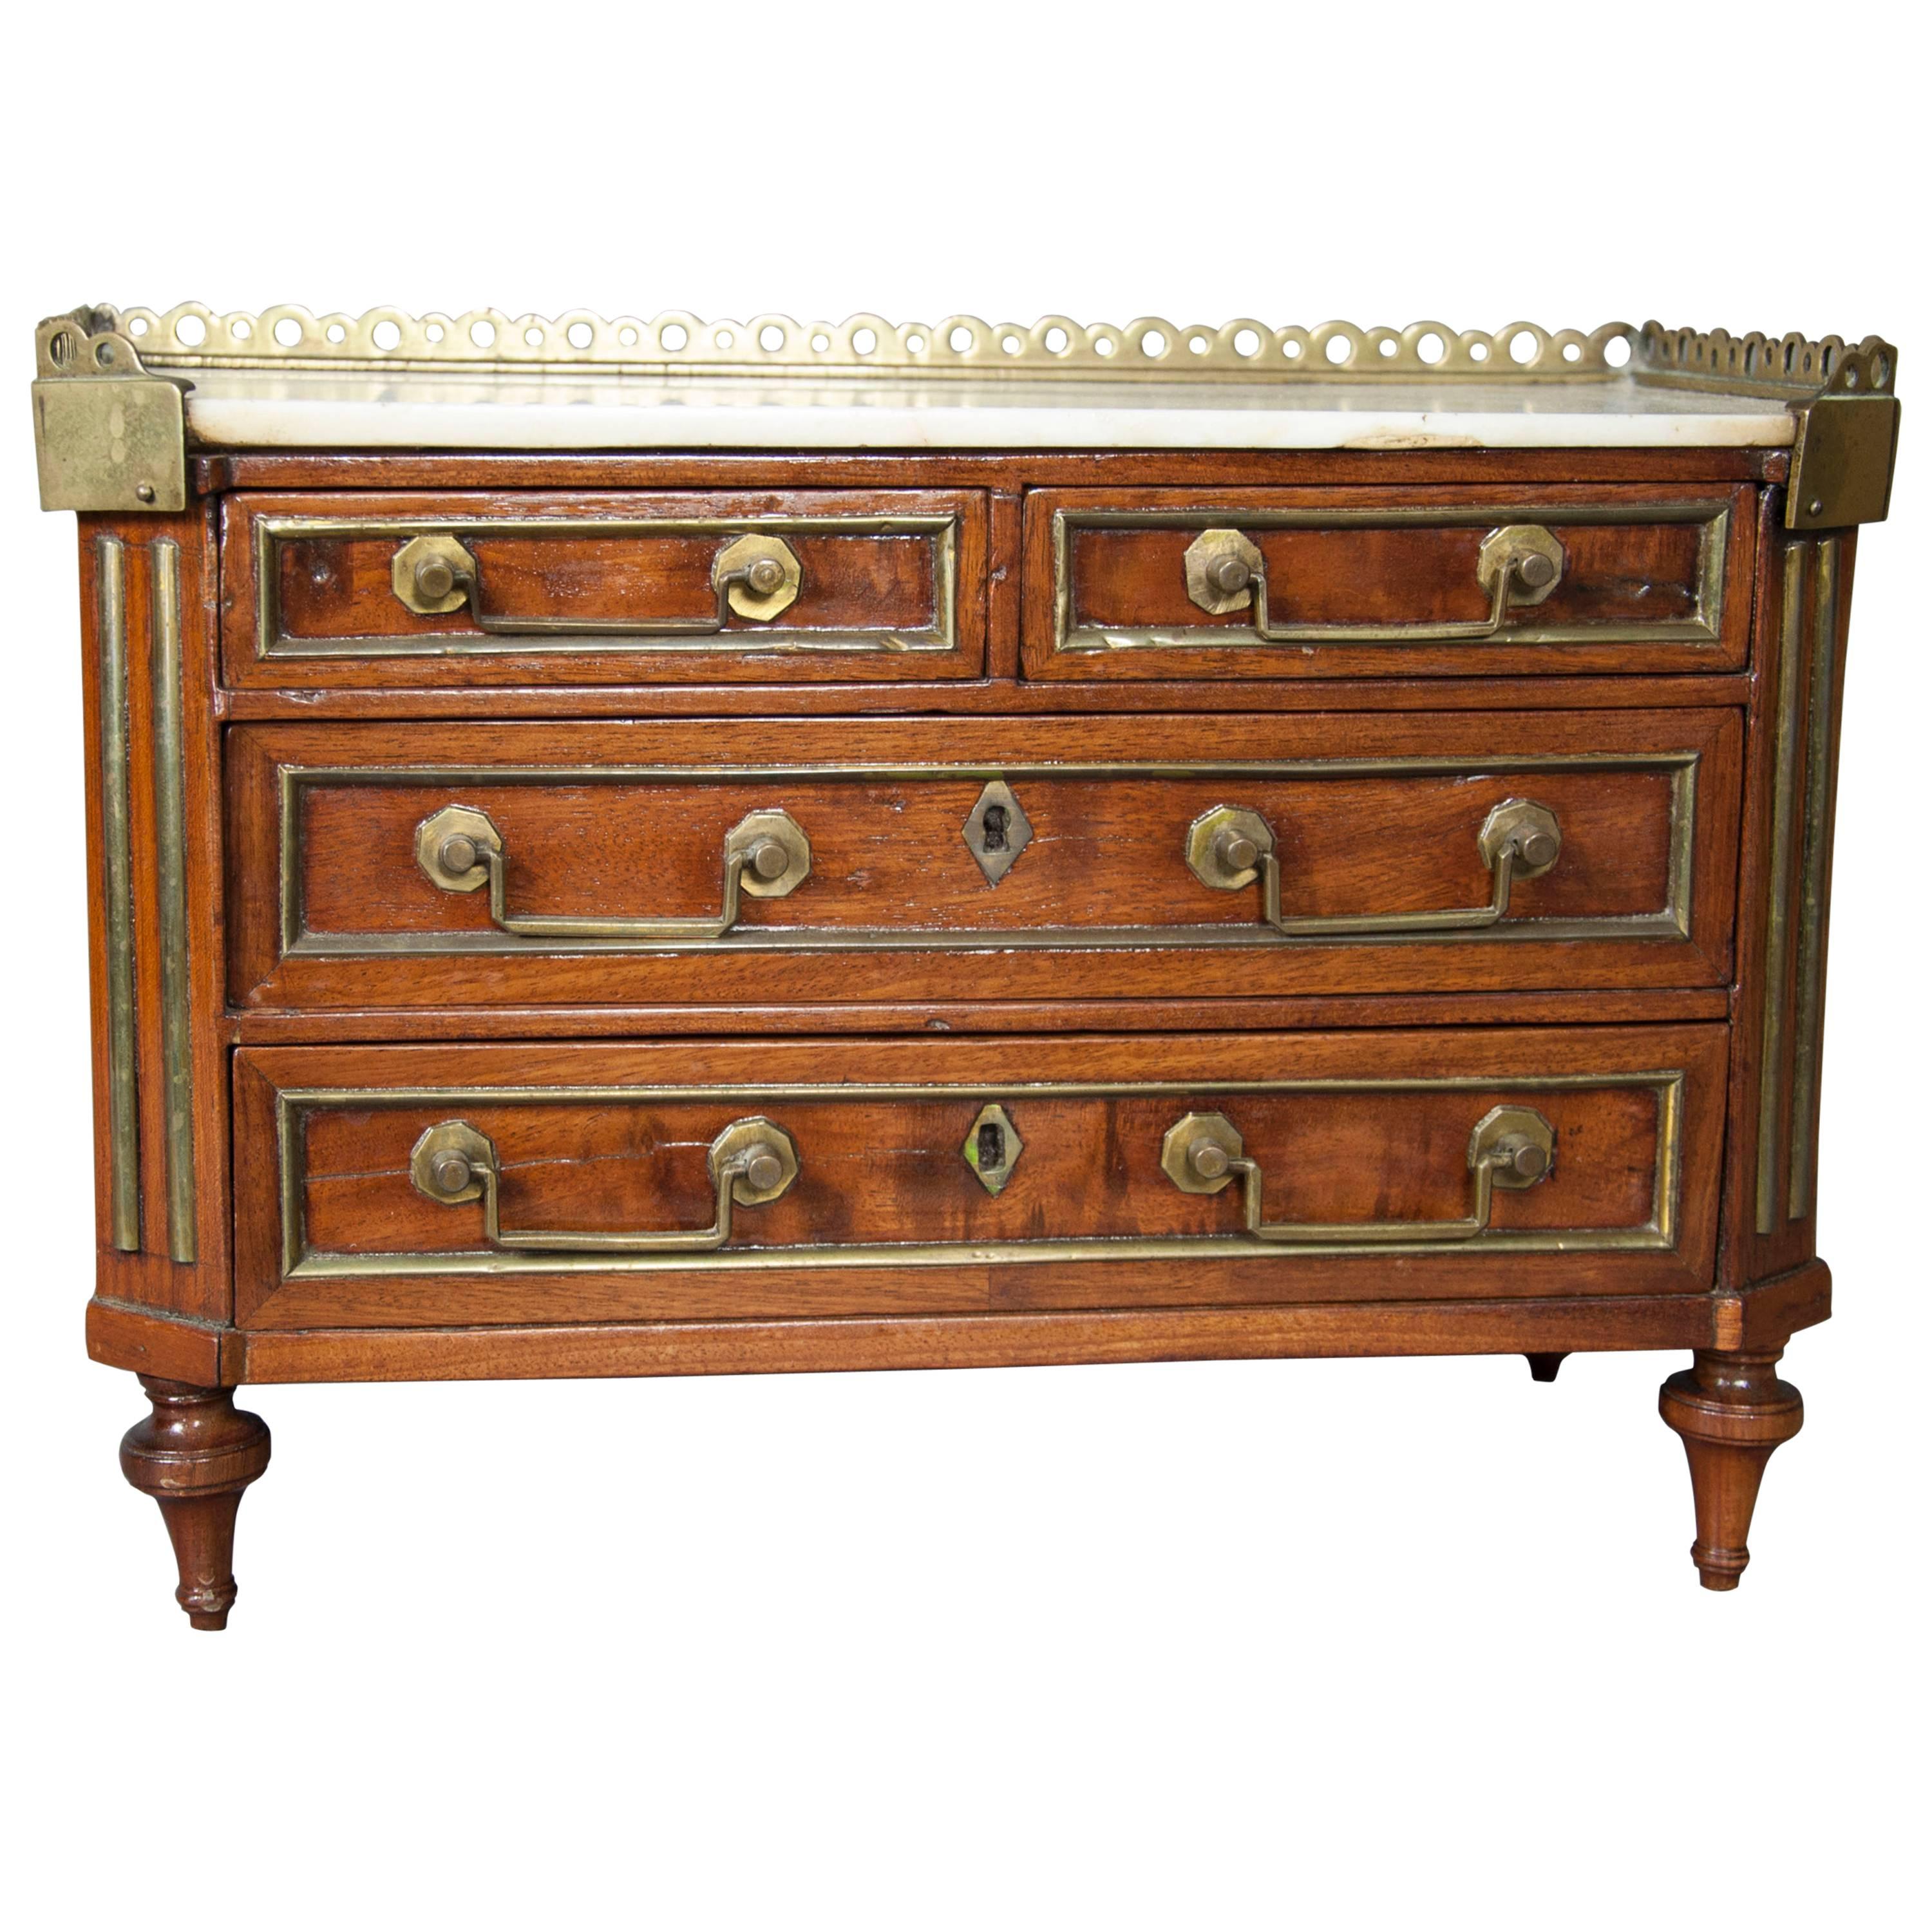 Directoire Style Mahogany and Brass Inlaid Miniature Commode